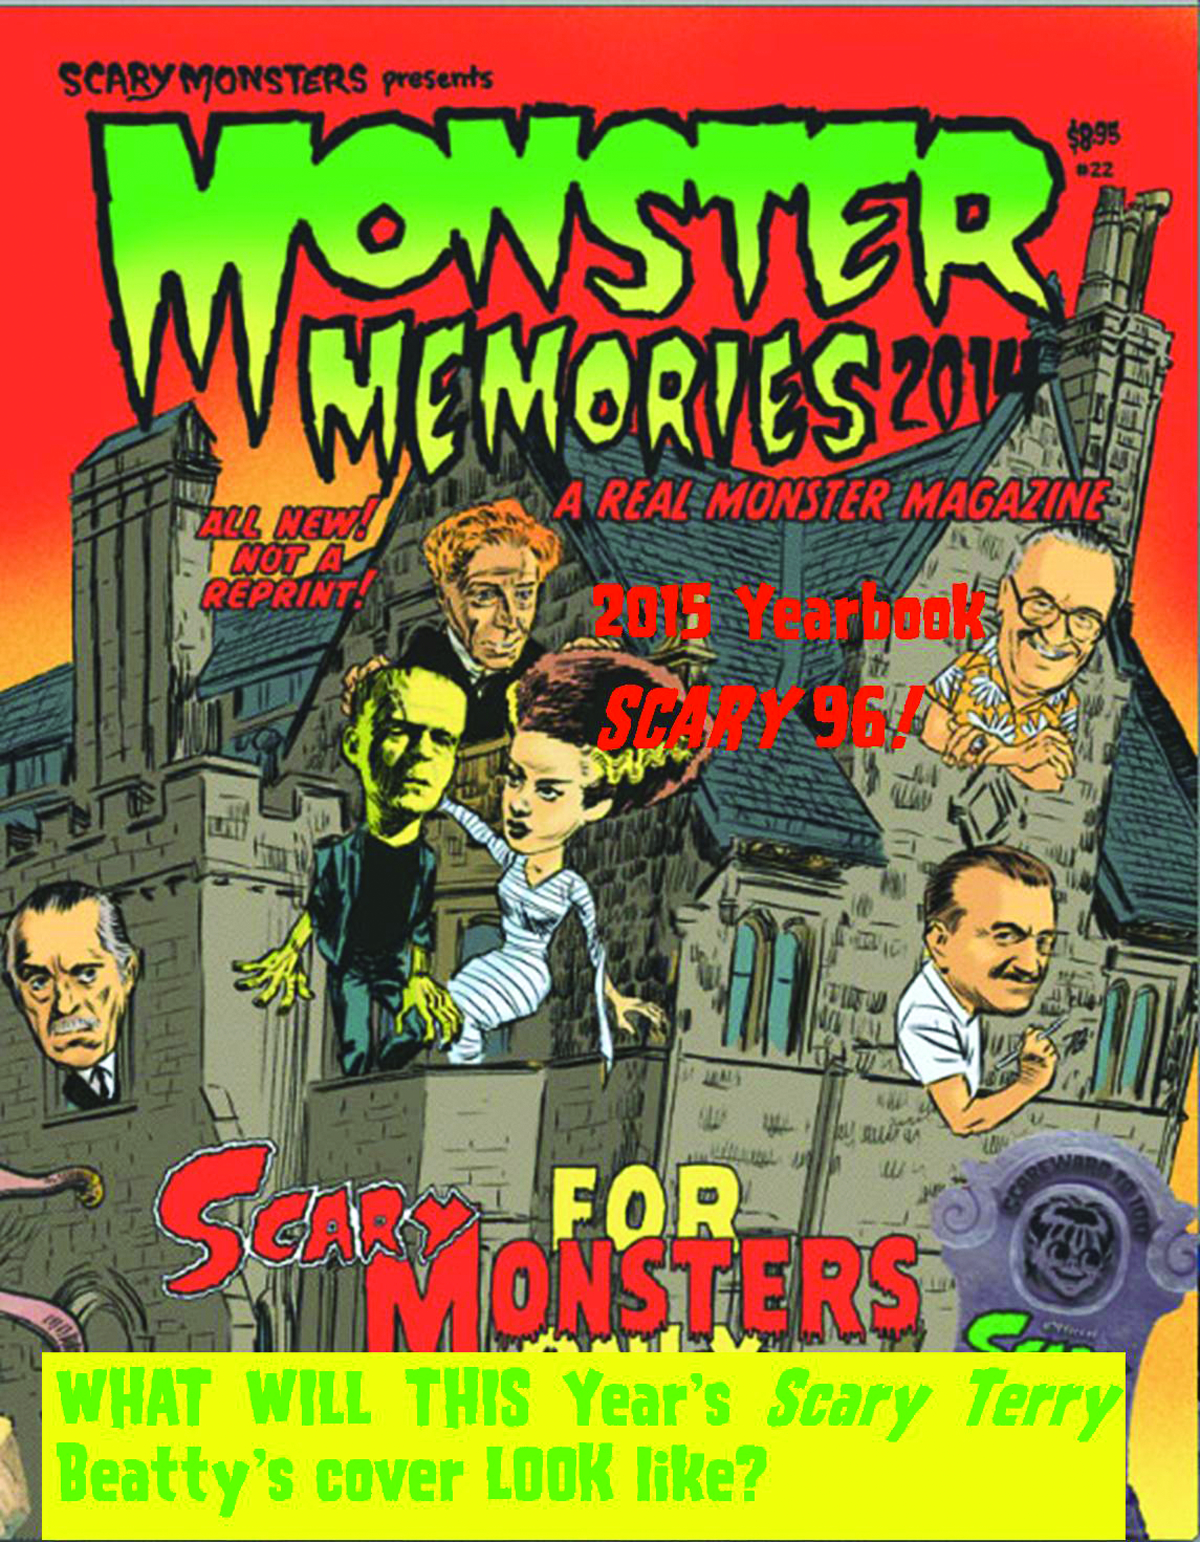 SCARY MONSTERS MAGAZINE #96